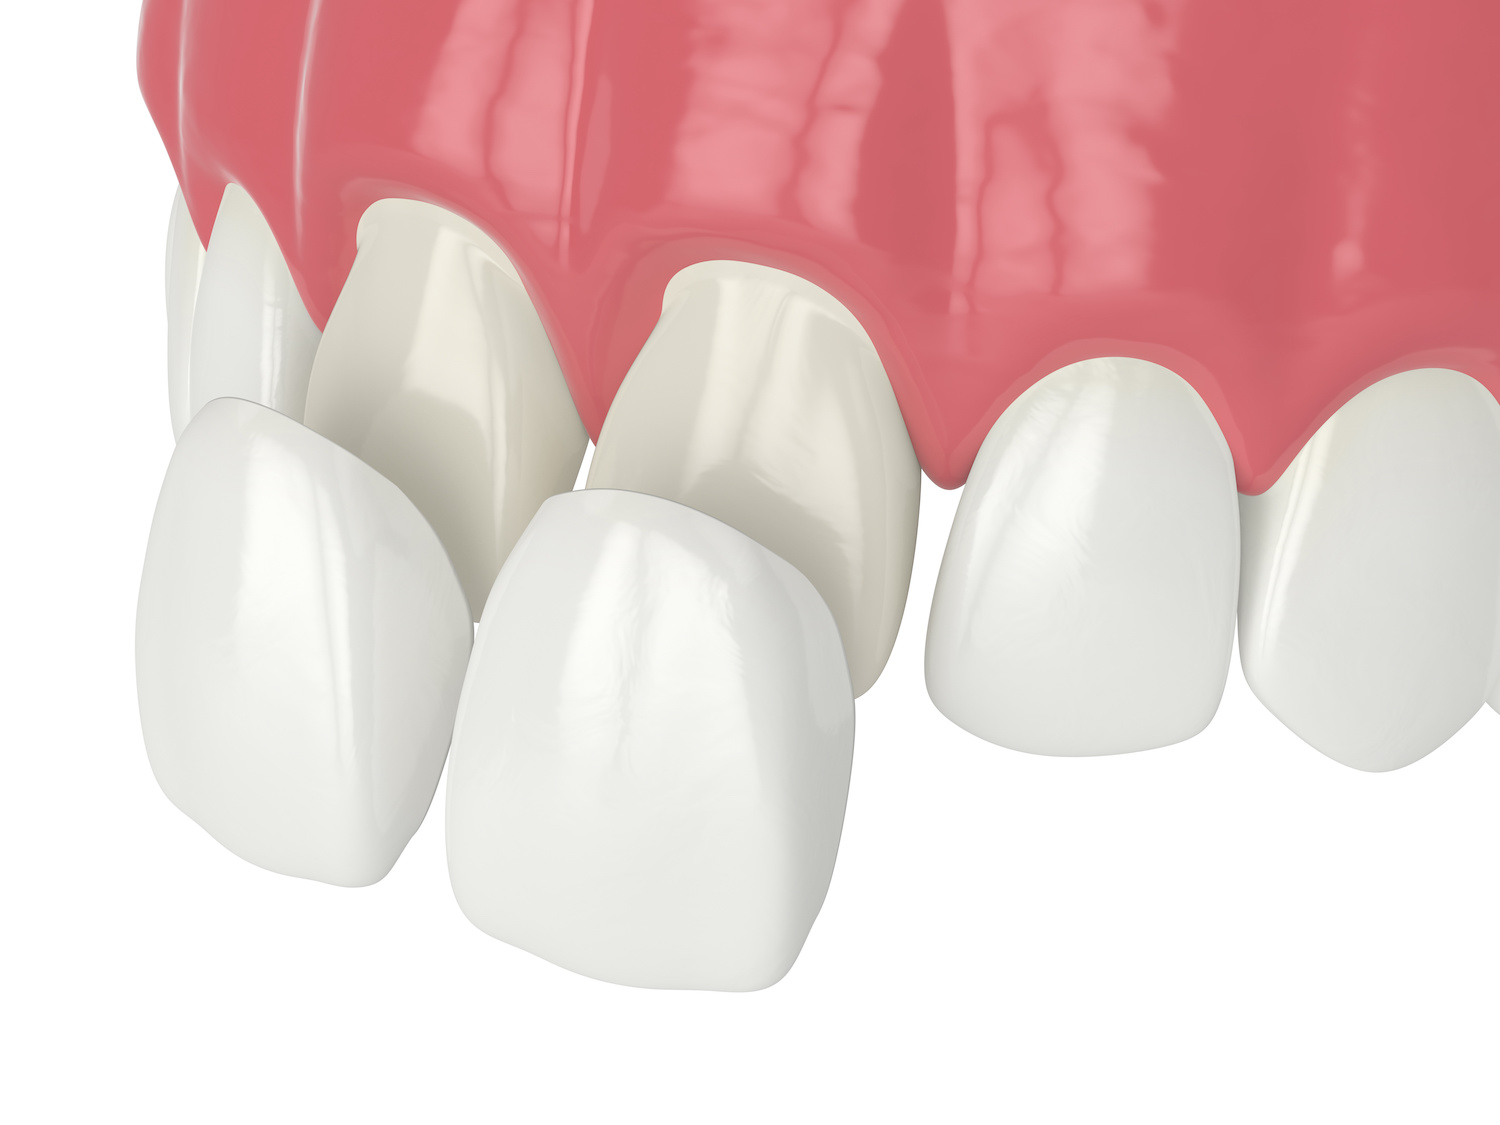 How Much Are Dental Veneers in Miami